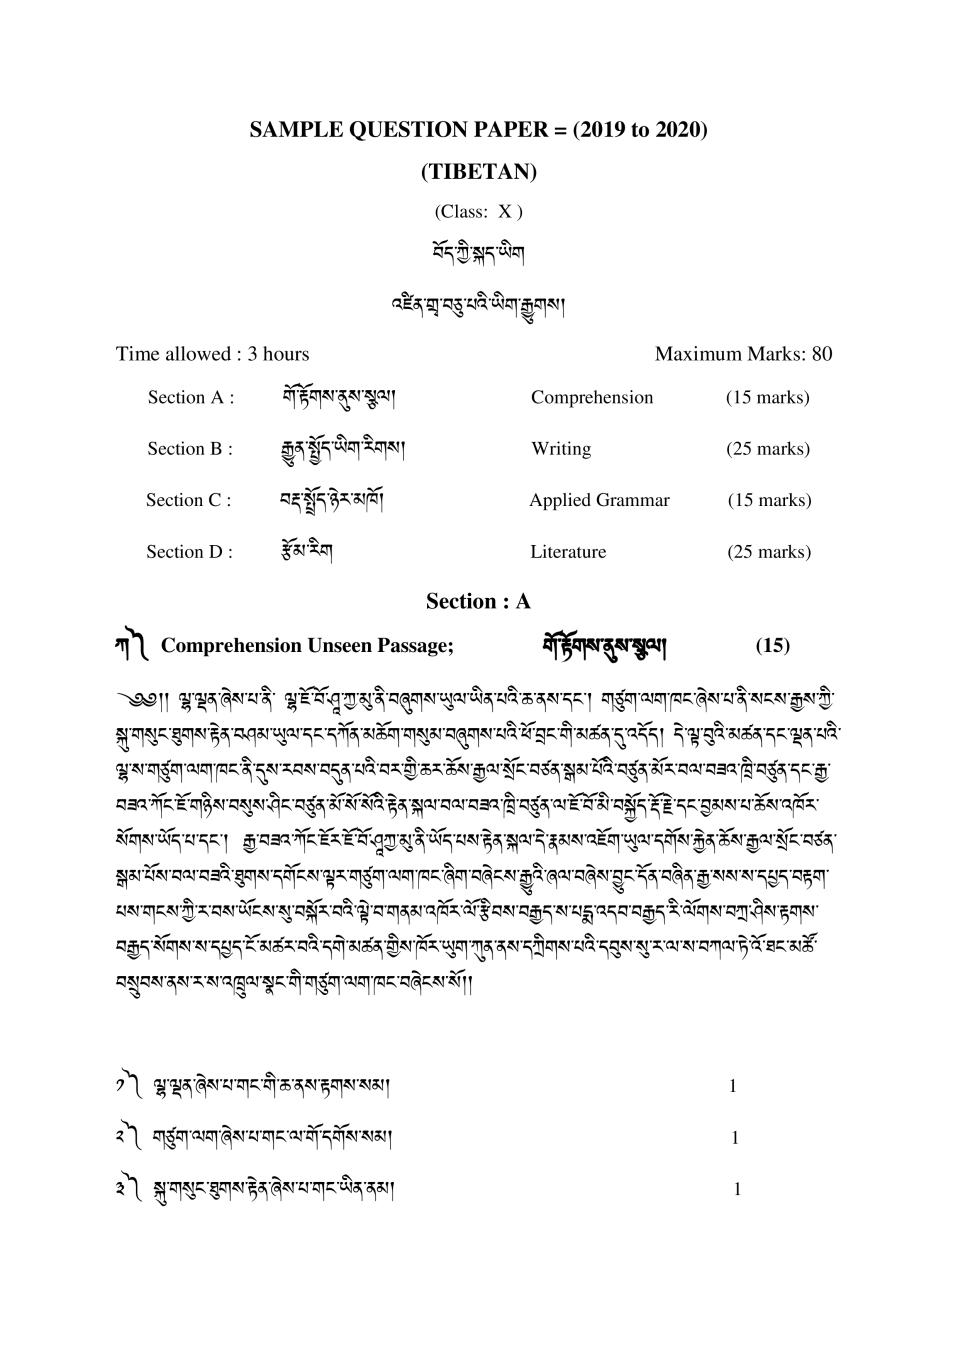 CBSE Class 10 Sample Paper 2020 for Tibetan - Page 1